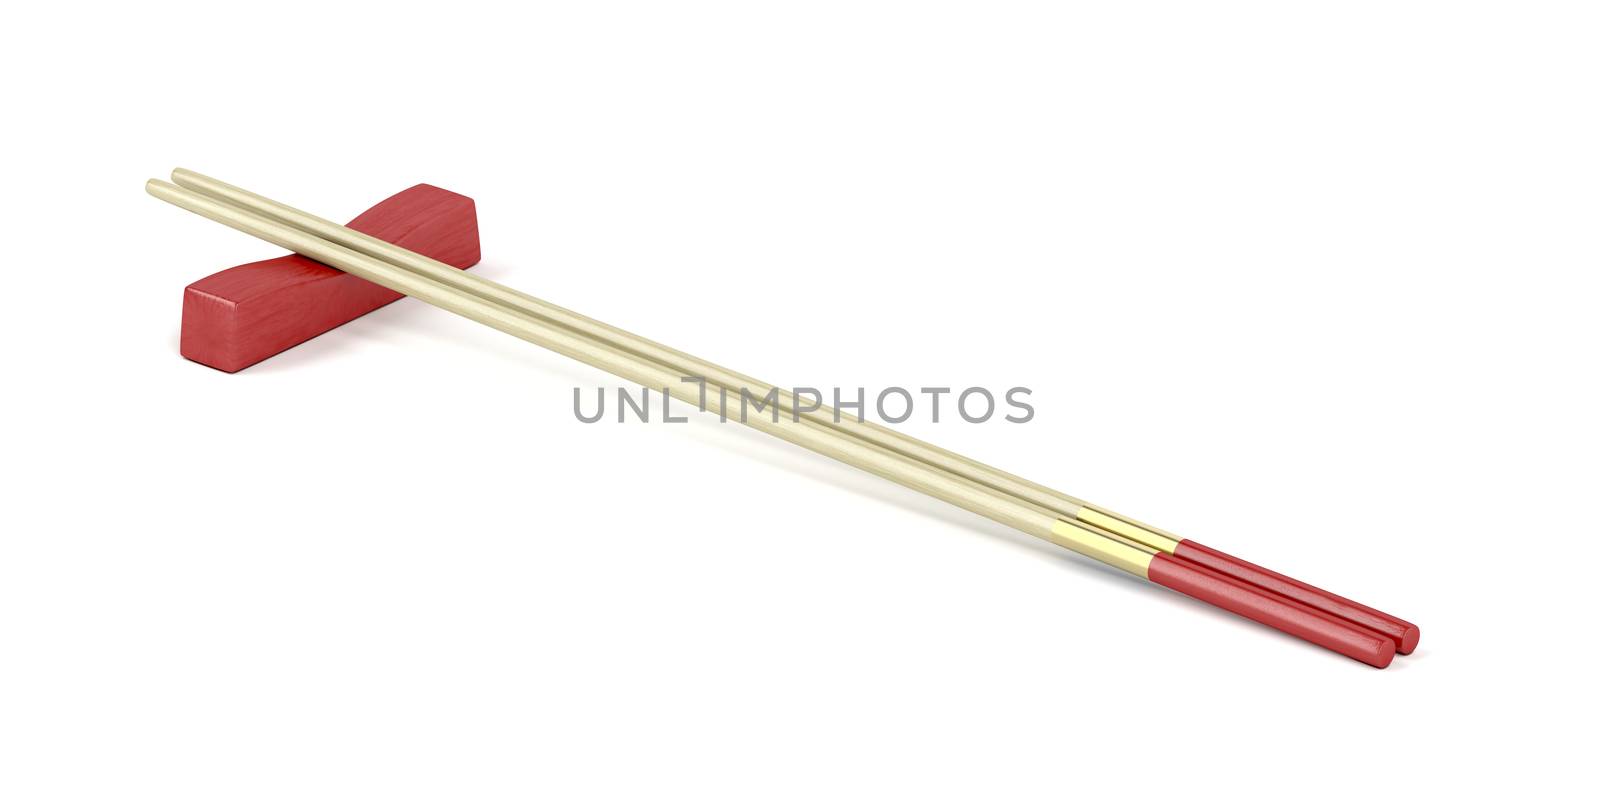 Pair of wooden chopsticks by magraphics